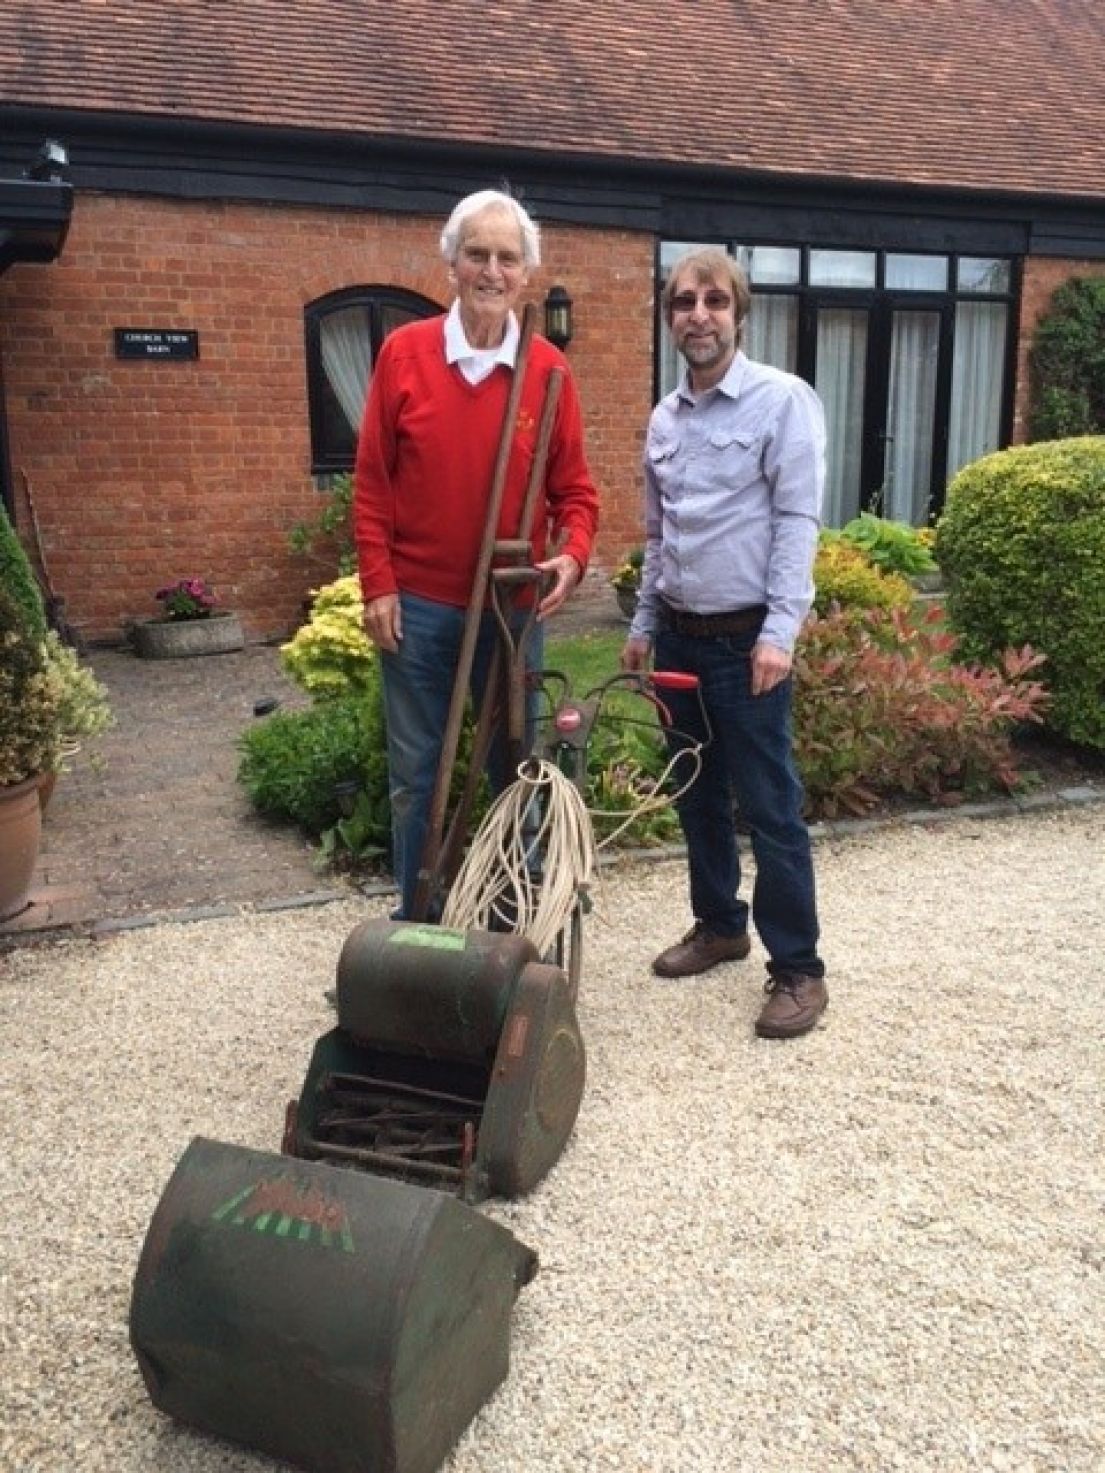 Two men, one wearing a red jumper and jeans, the other in a long sleeved checked shirt and jeans standing behind an old and slightly rusted lawnmower.